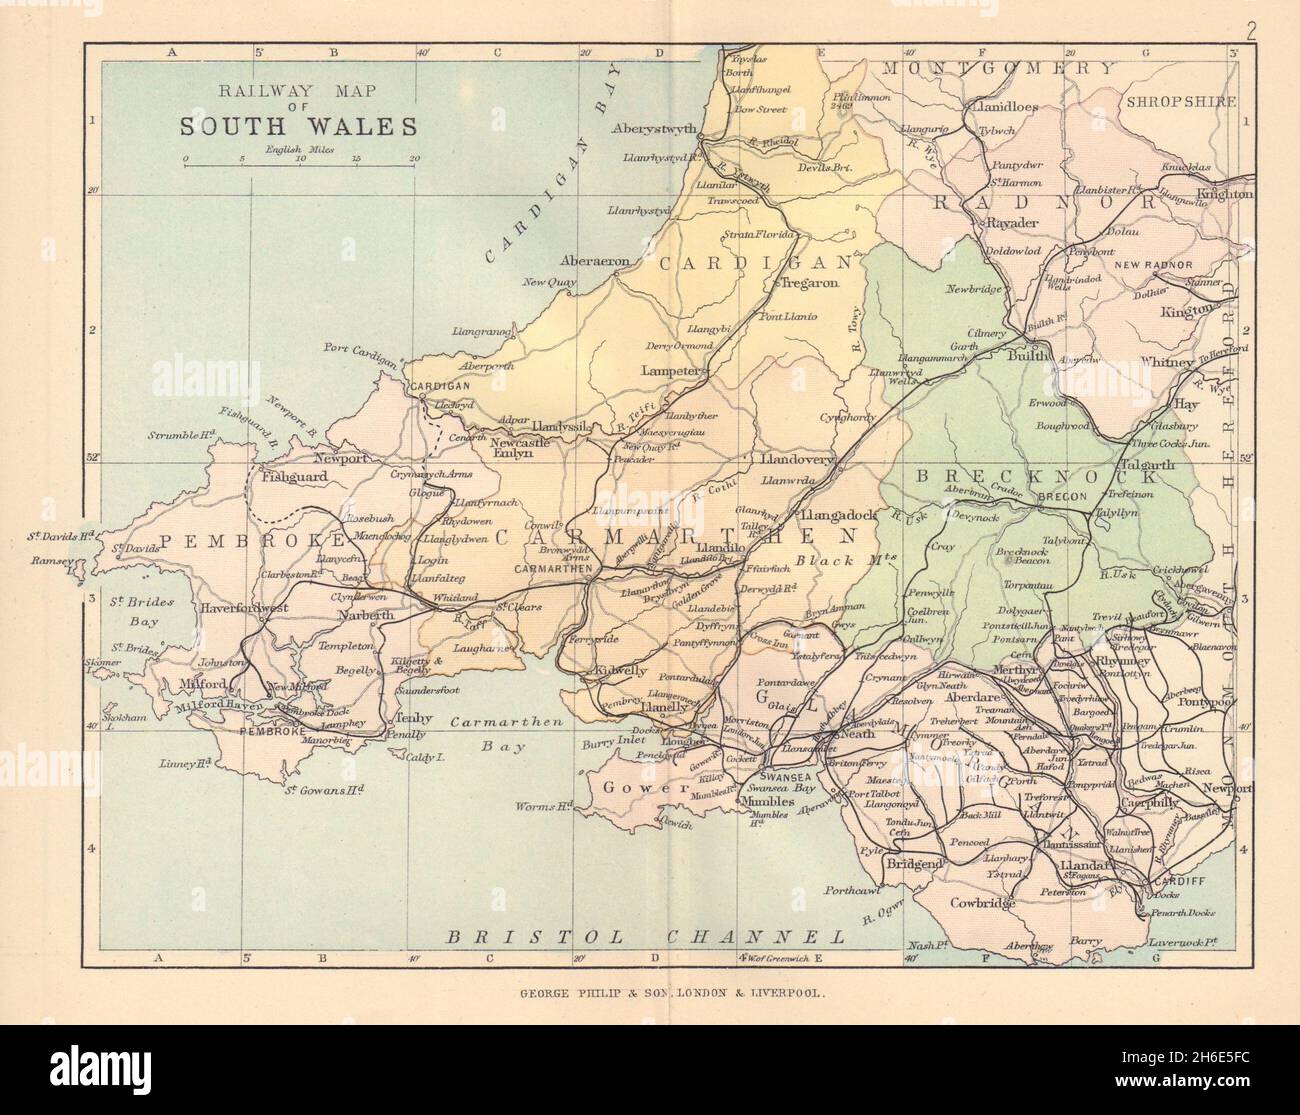 WALES Railway Map of South Wales BARTHOLOMEW 1885 old antique plan chart Stock Photo